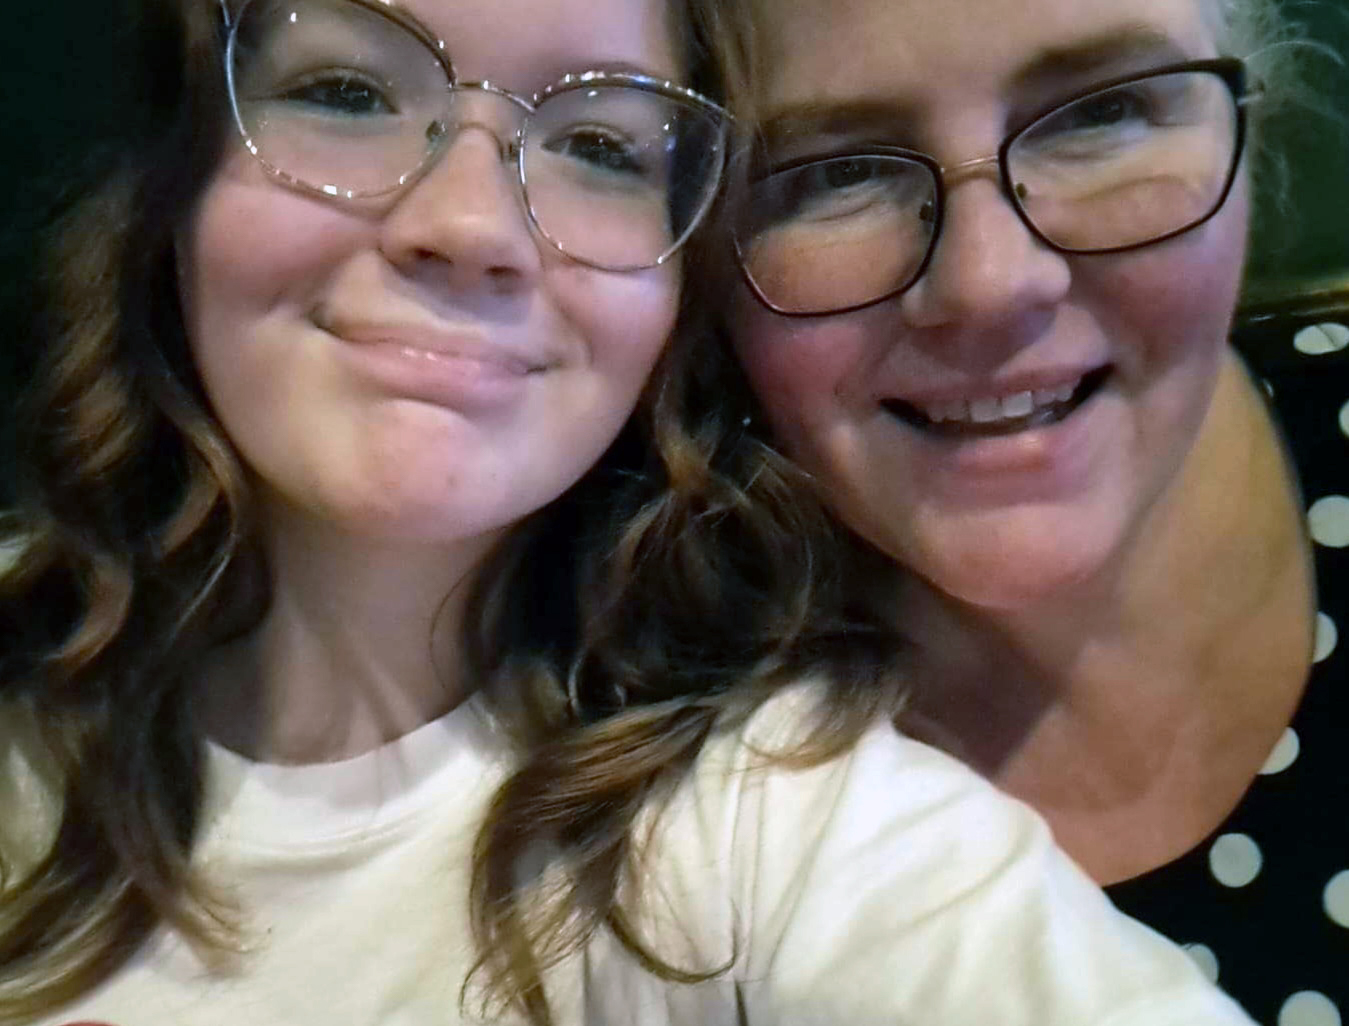 daughter and mother smile in close-up photo